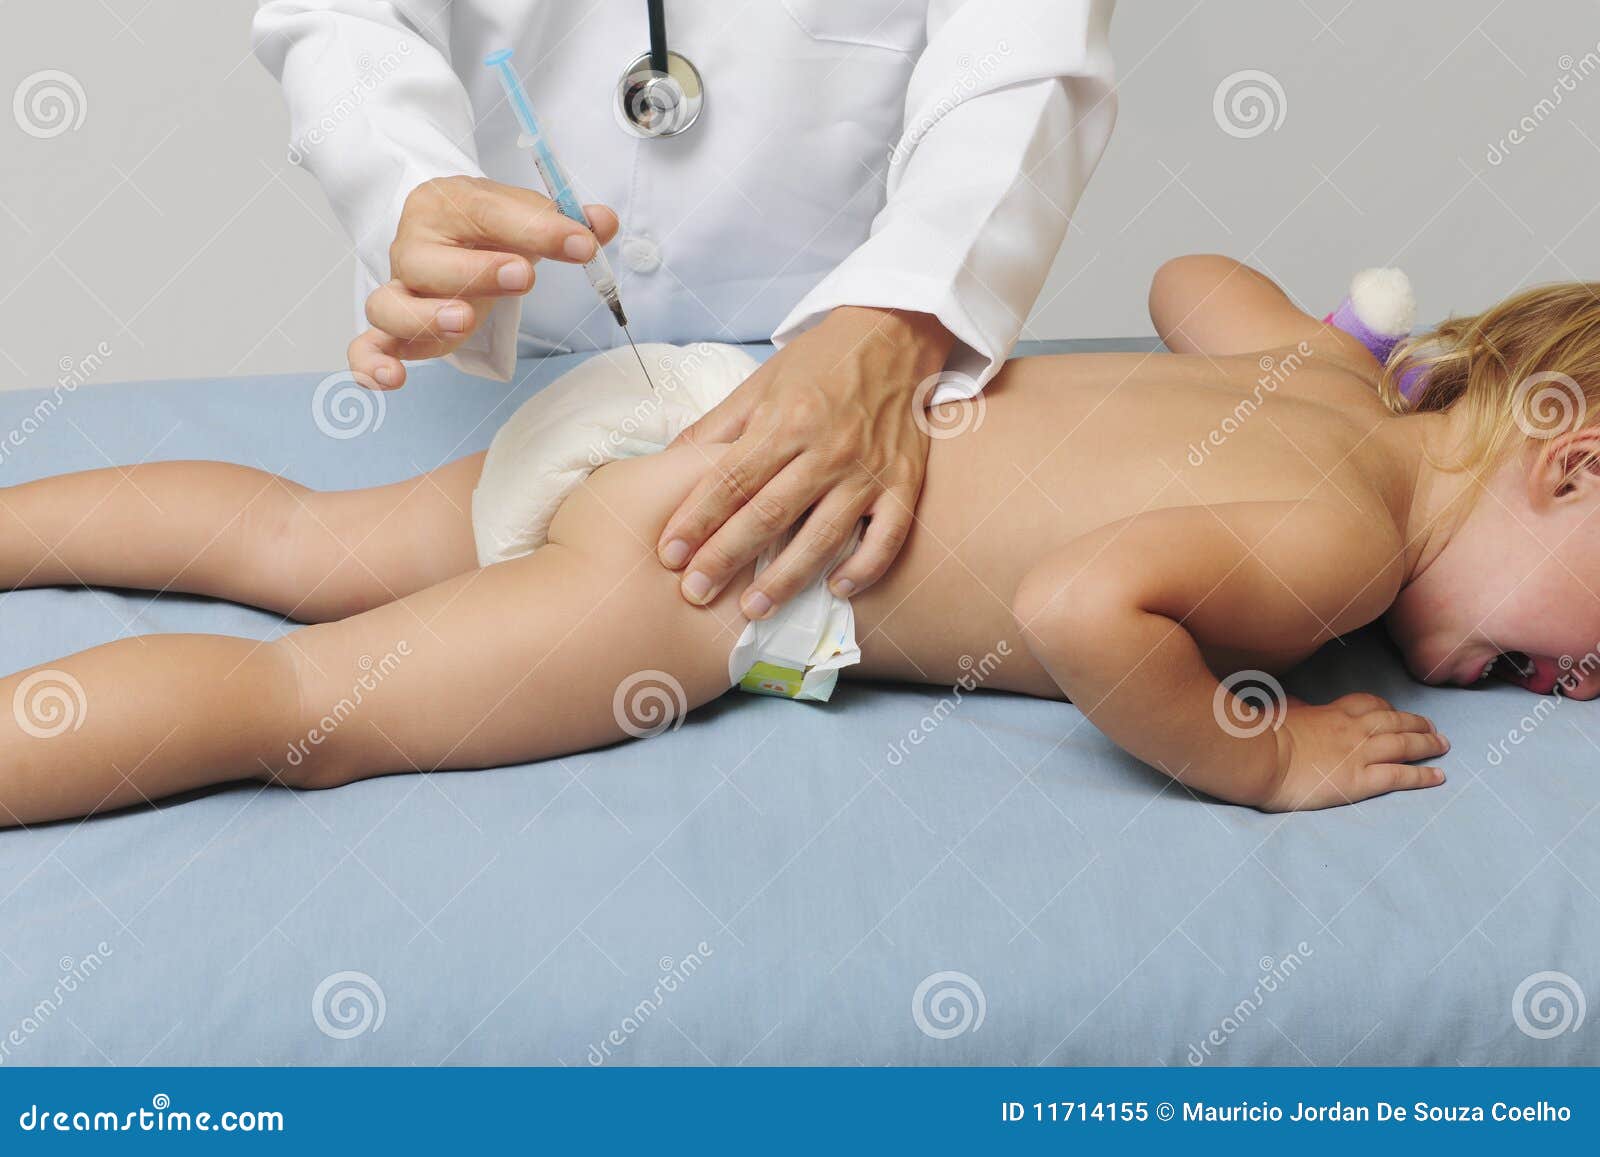 vaccination: doctor injecting baby